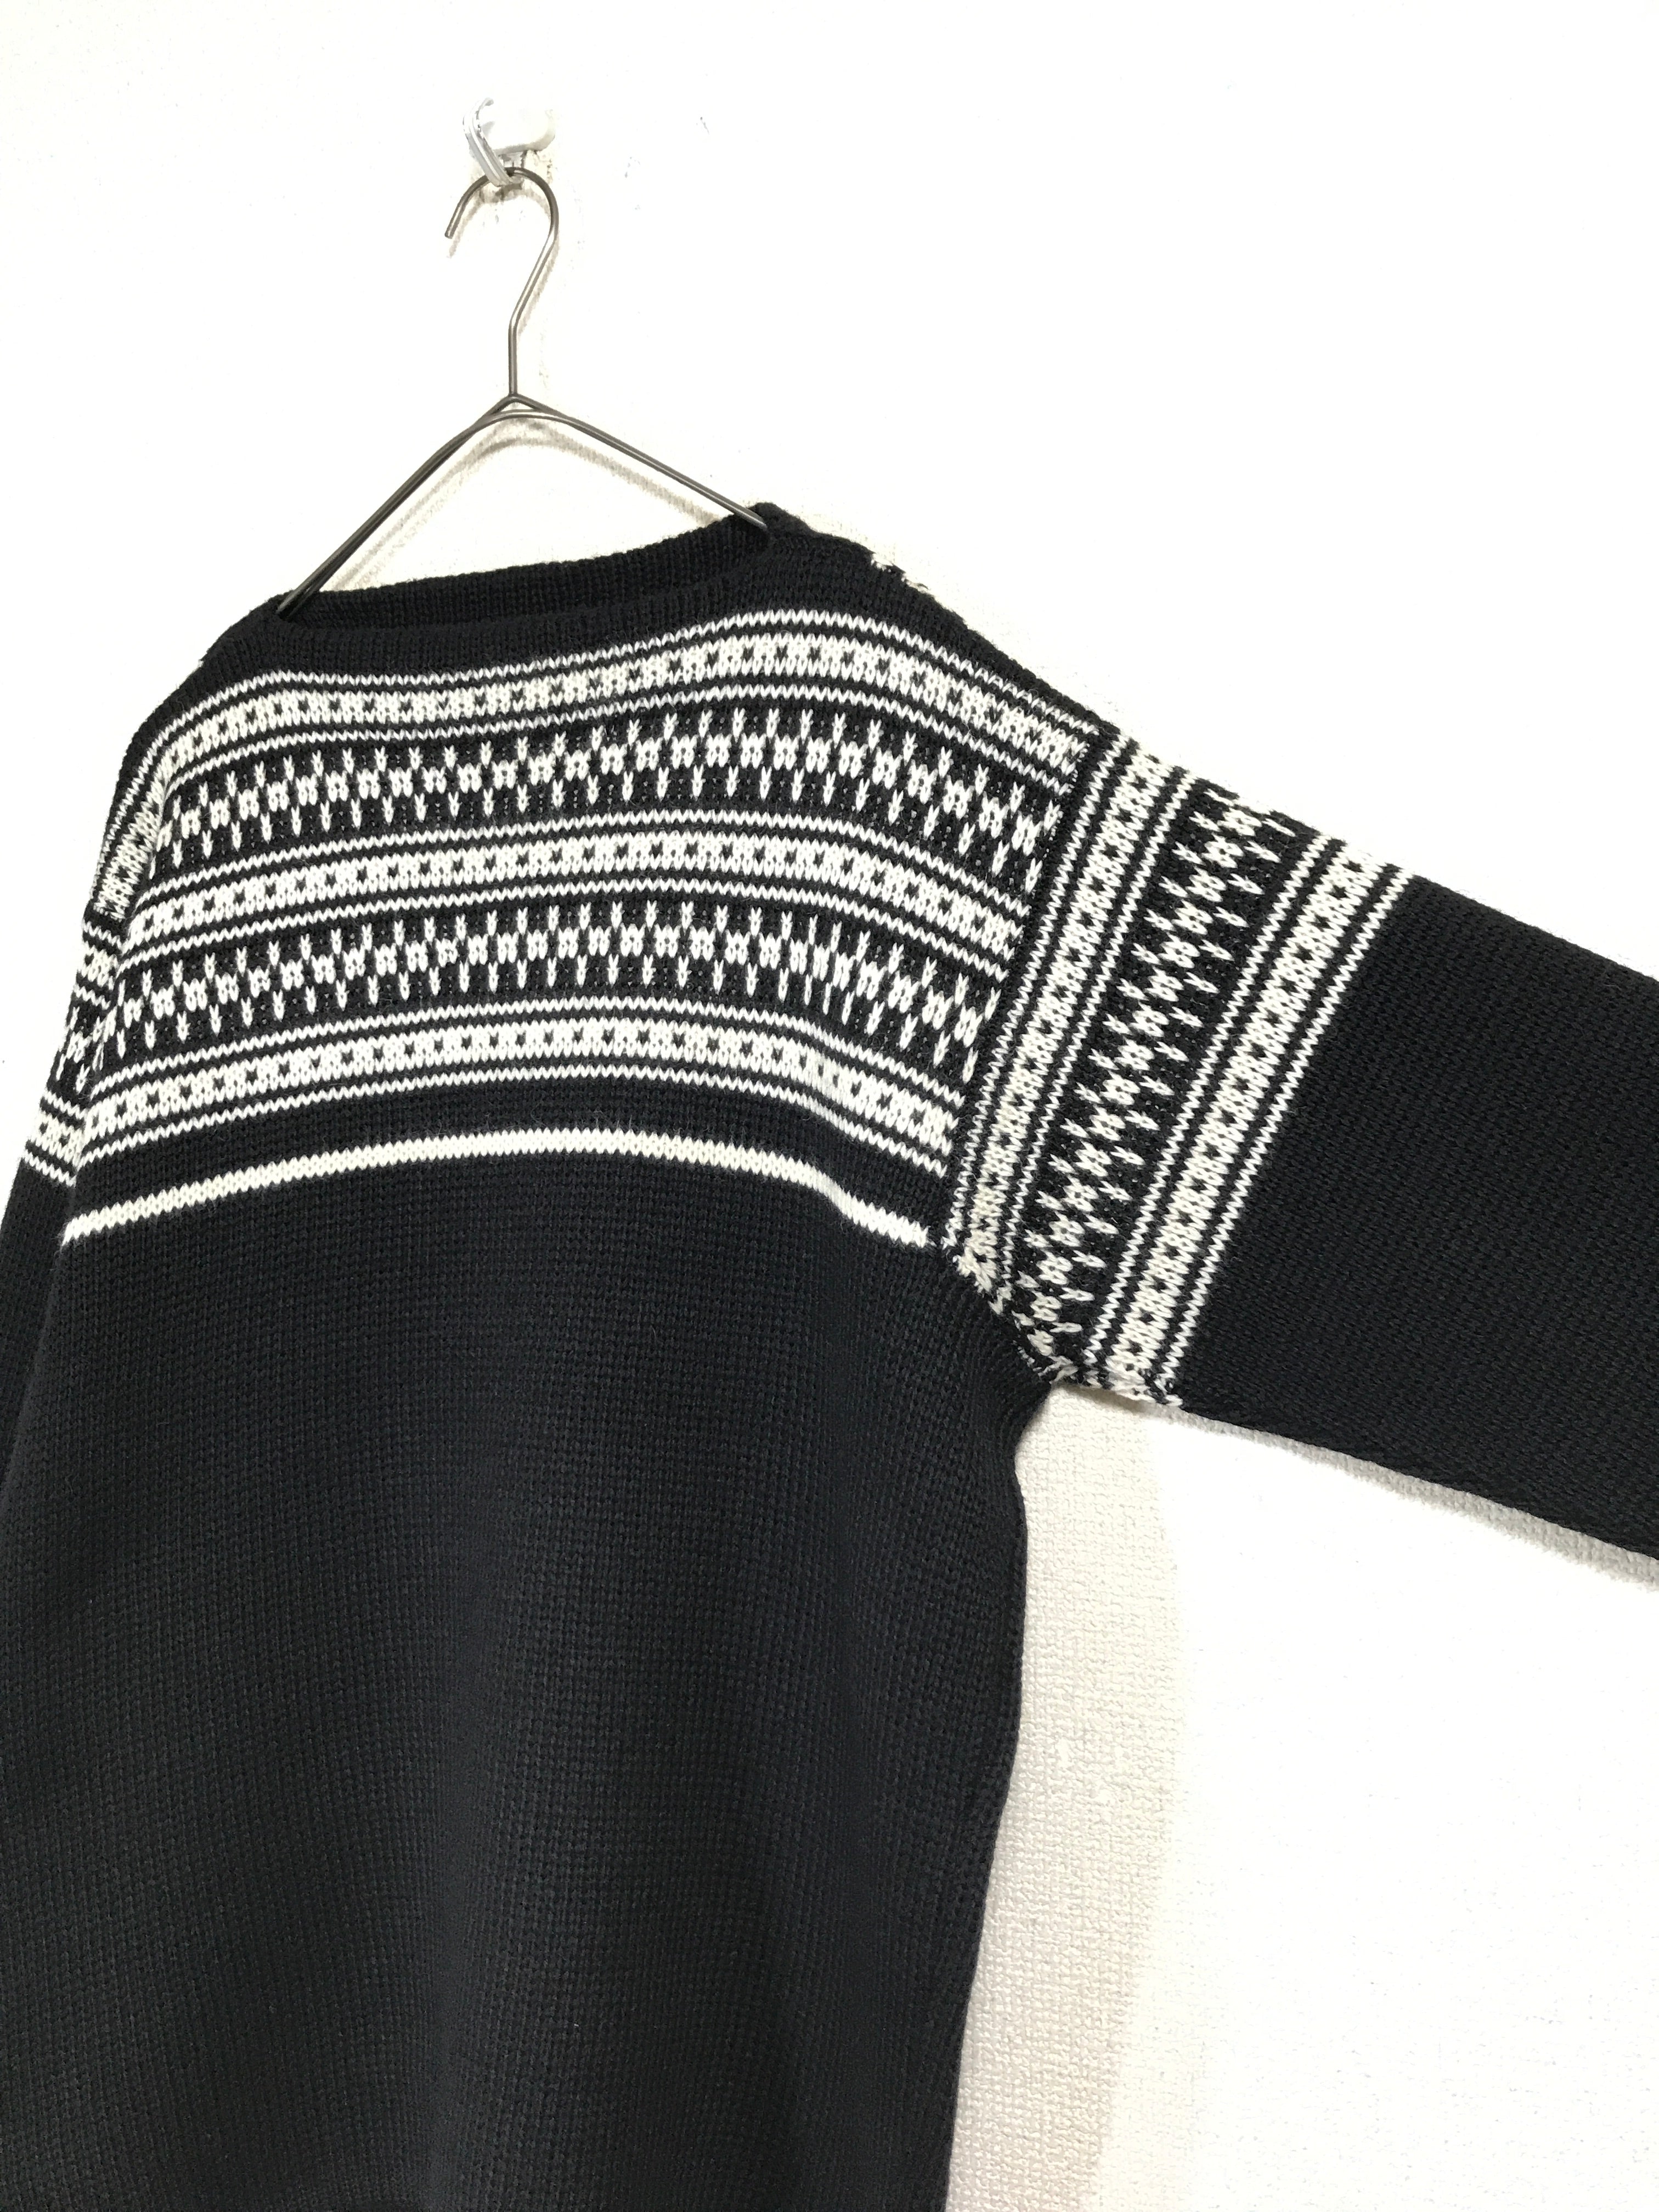 old wool boat-neck knit sweater